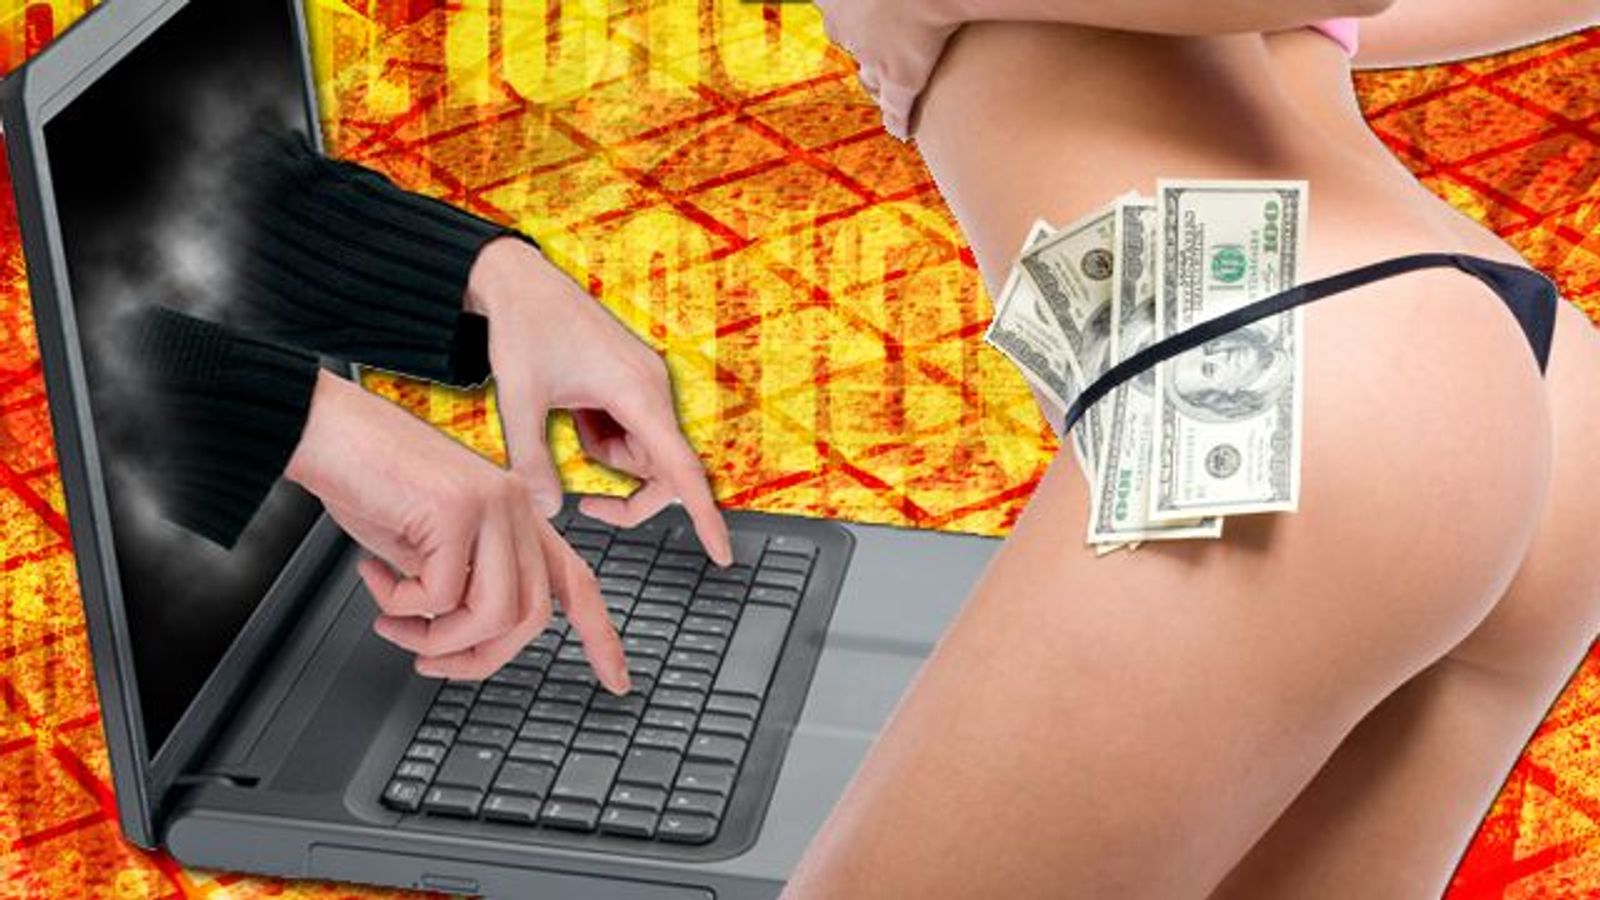 More Scammers Offering Women 'Big Money Making Porn!'